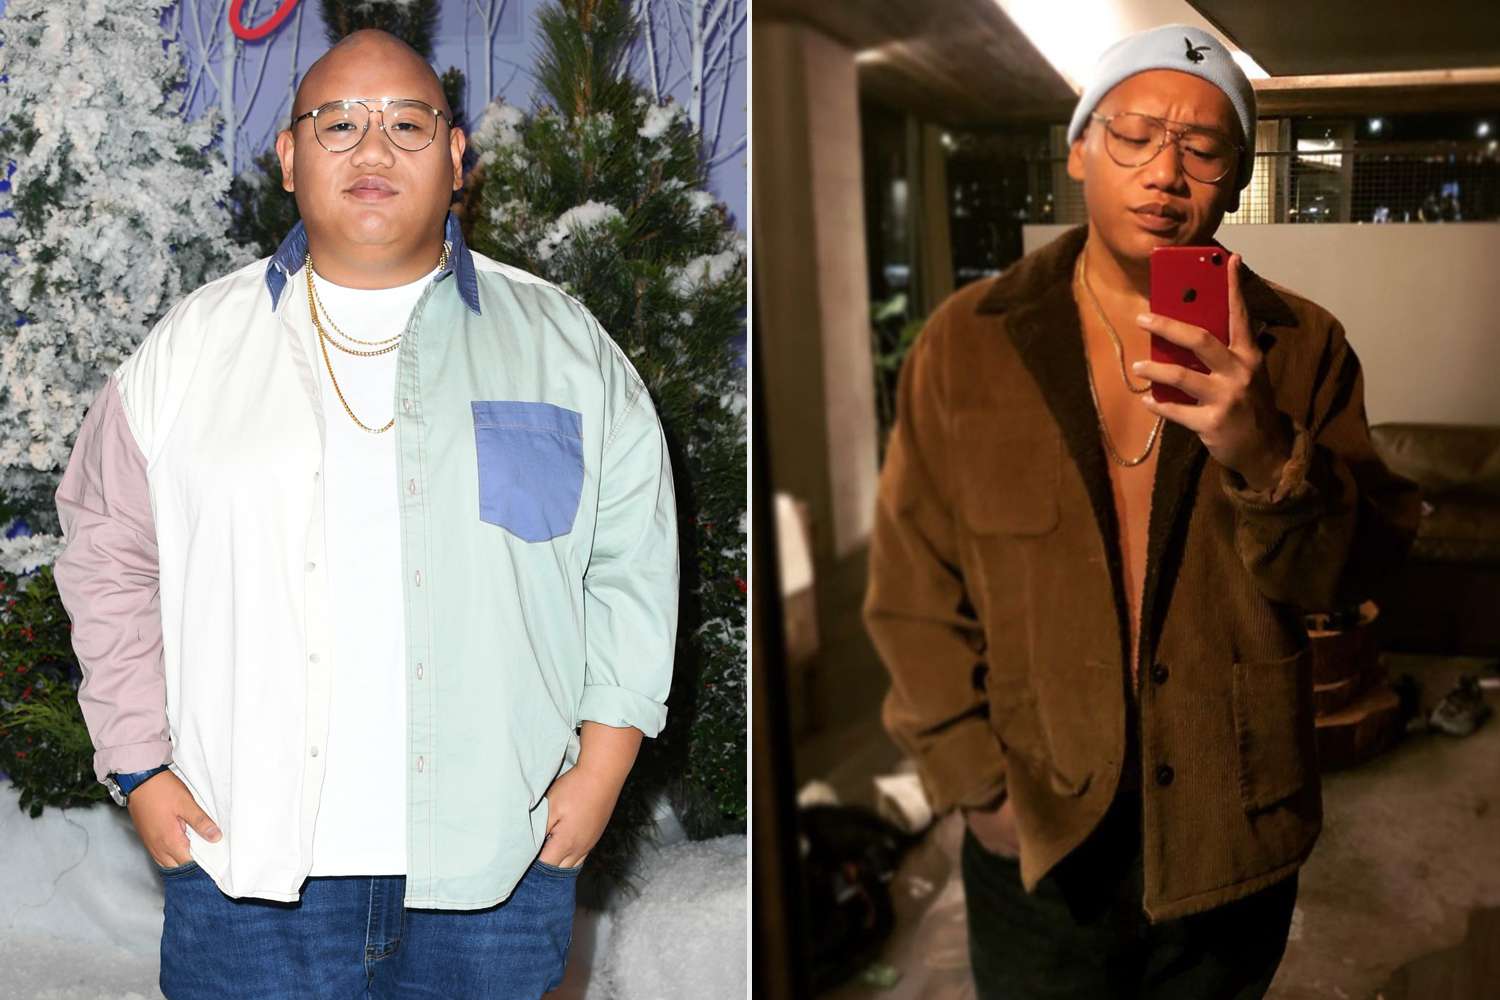 Spider-Man's Jacob Batalon Shows Off Weight Loss | PEOPLE.com - PEOPLE